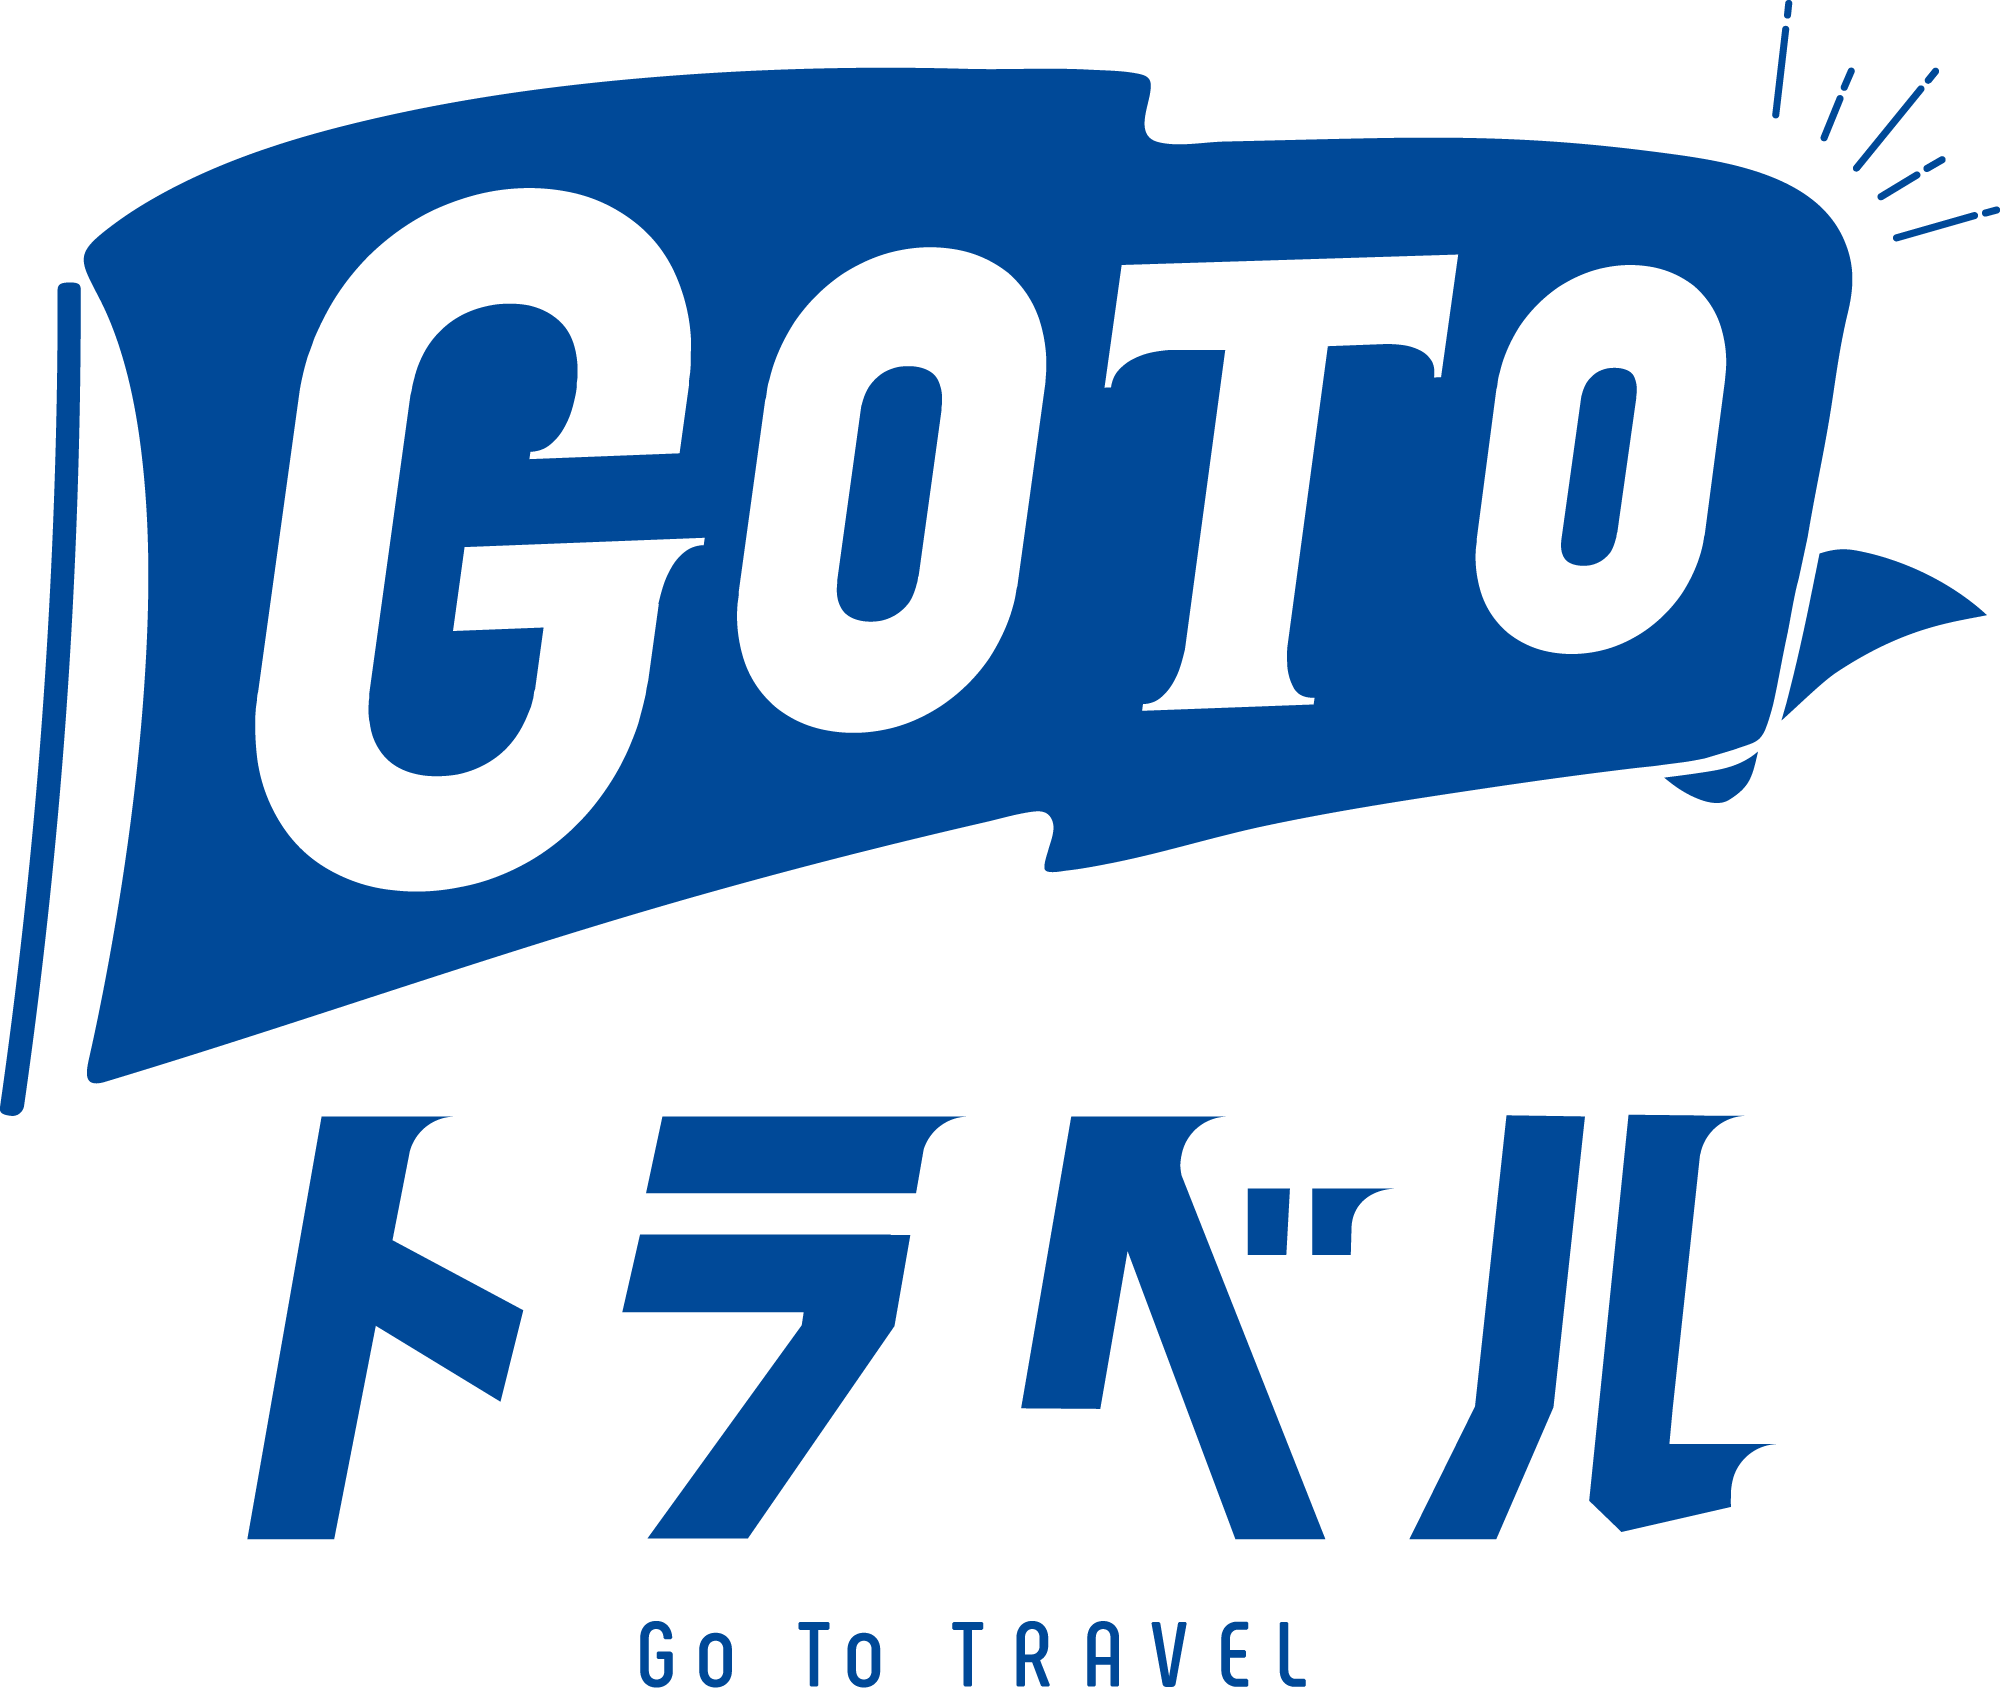 Go To Travel campaign will be suspended nationwide